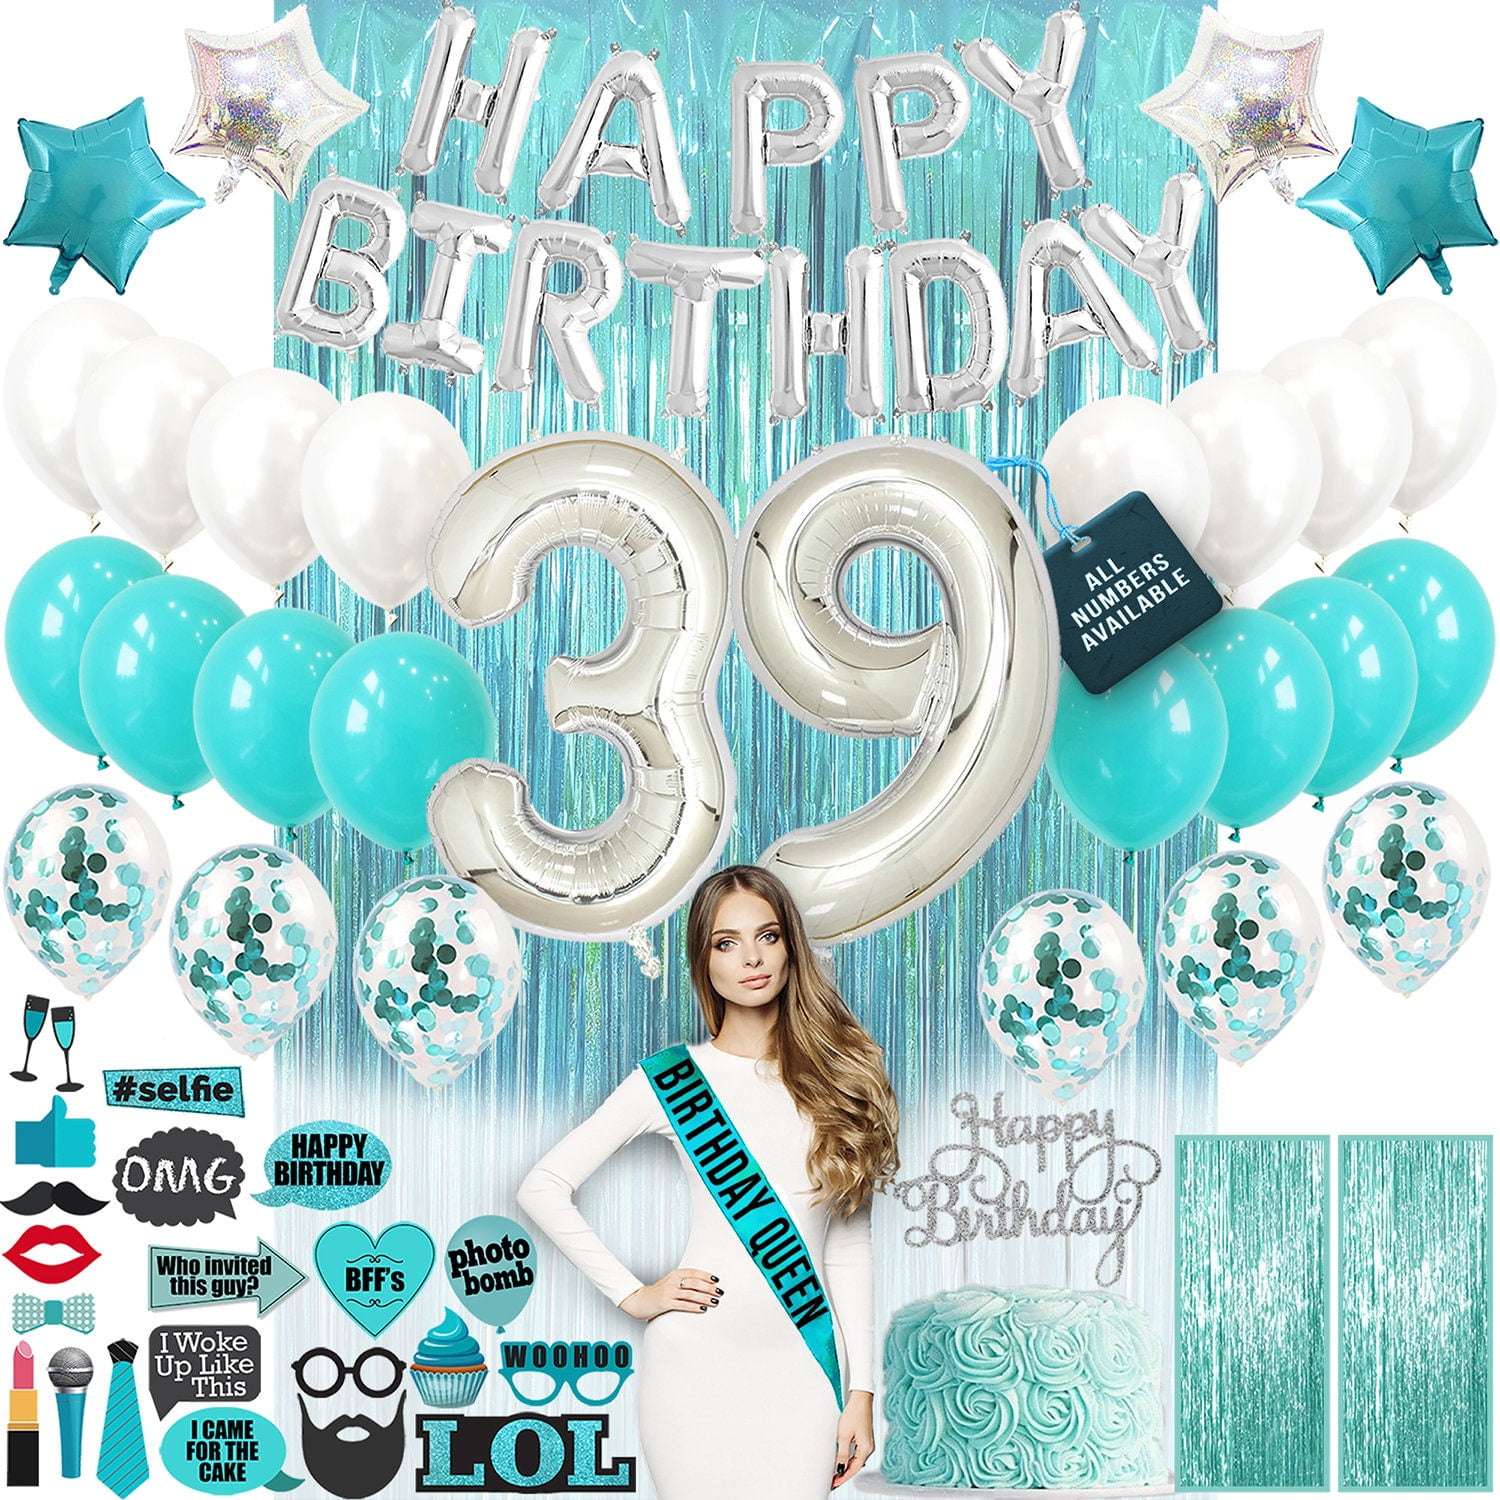 39th Birthday Decorations, Birthday Party Supplies, Thirty Nine Birthday Banner Teal Green Confetti Balloons Her Photo, 39 Bday Cake Topper - Walmart.com